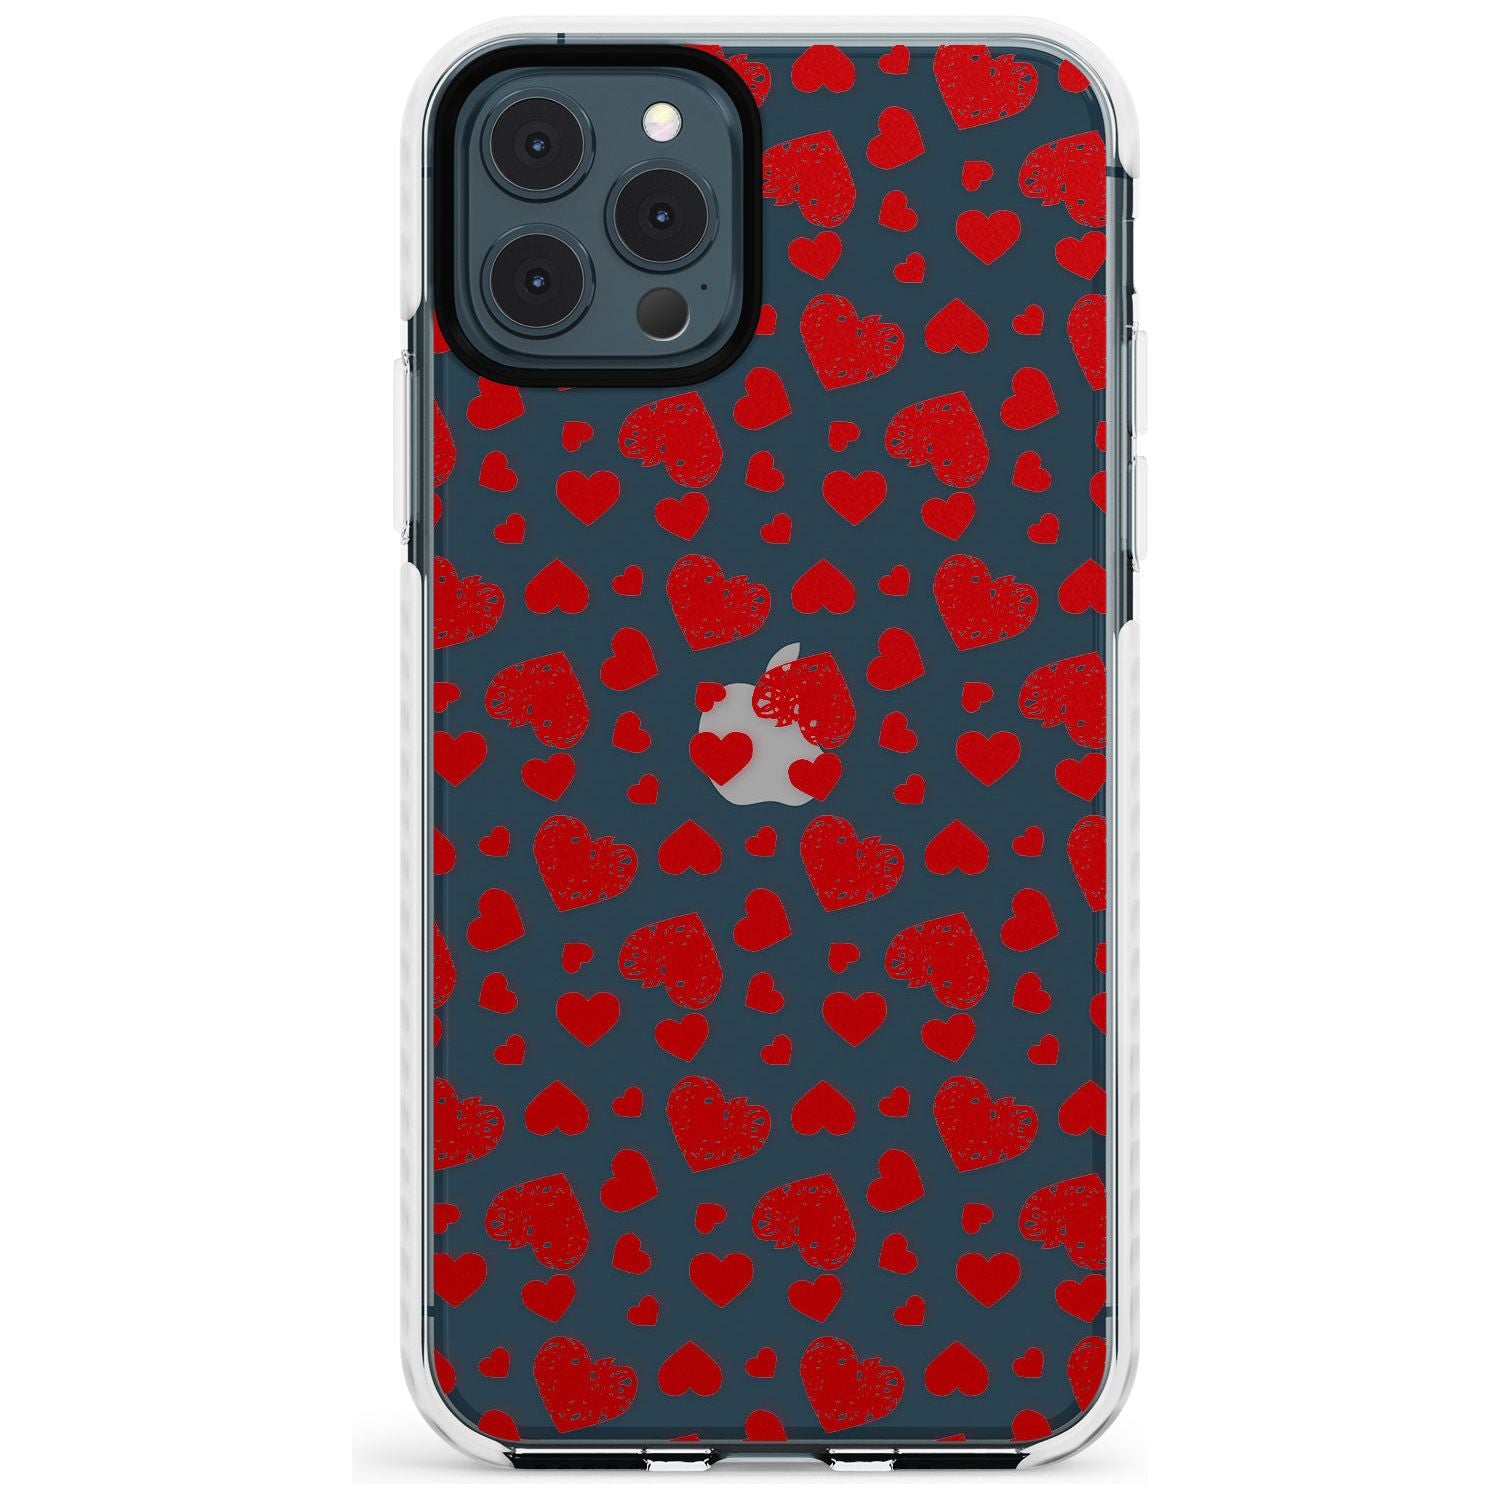 Sketched Heart Pattern Slim TPU Phone Case for iPhone 11 Pro Max